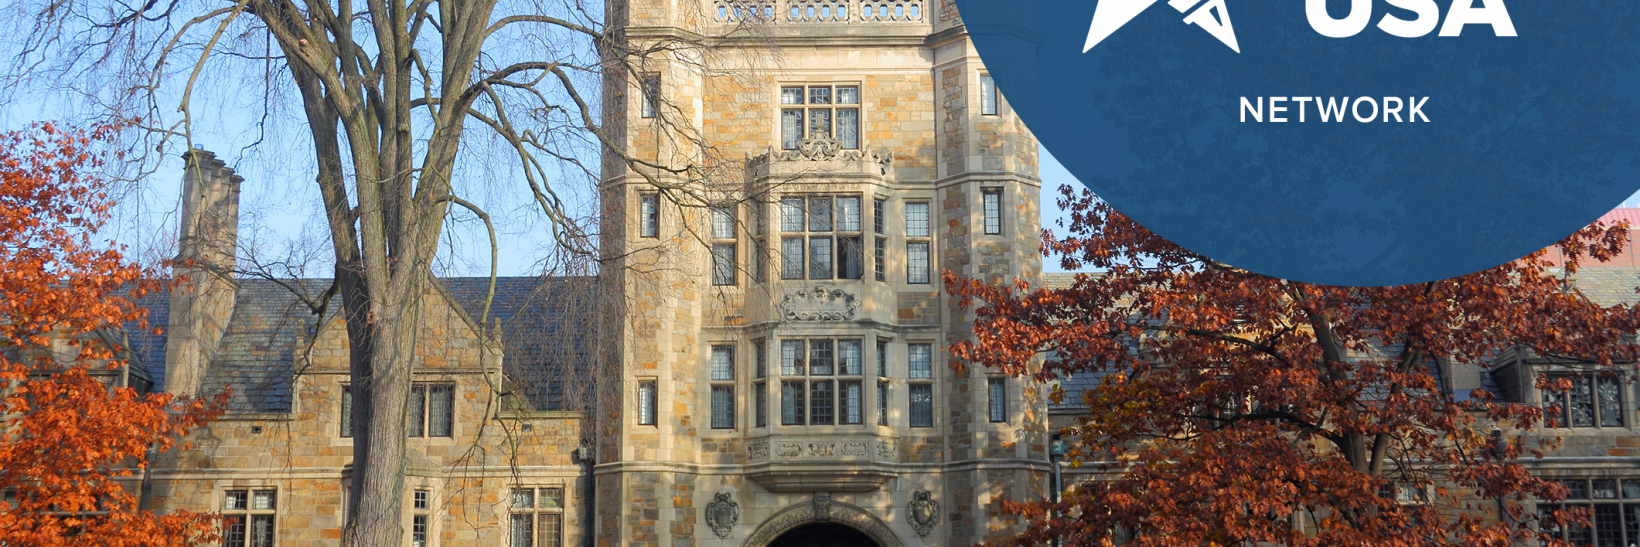 Picture of a large Gothic building on a college campus with "From the EducationUSA Network" written in the upper right hand corner. 